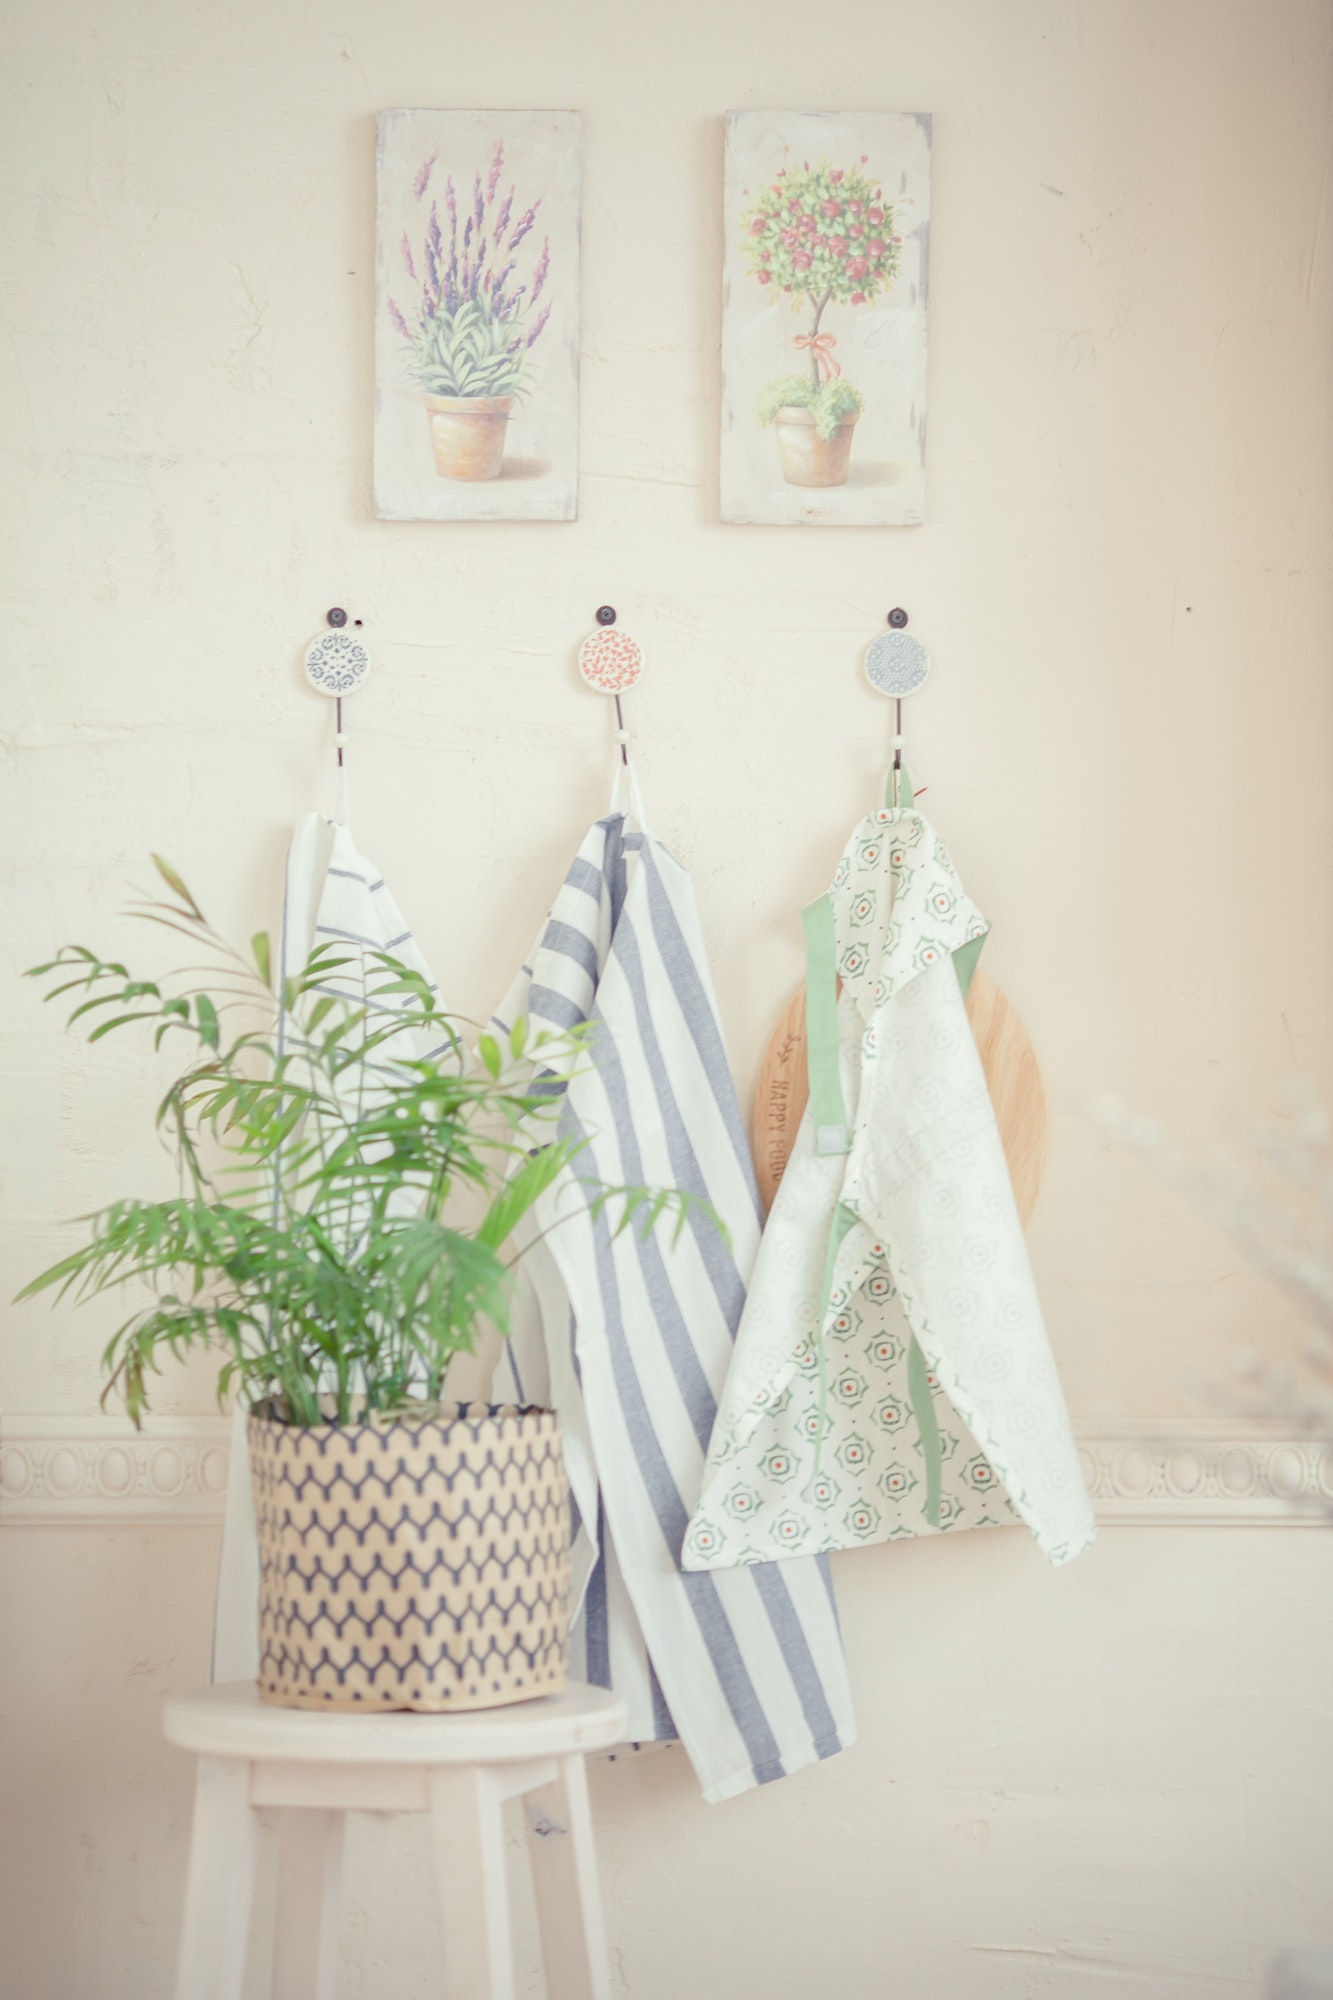 Kitchen towels hang on hooks on the wall, next to a green plant